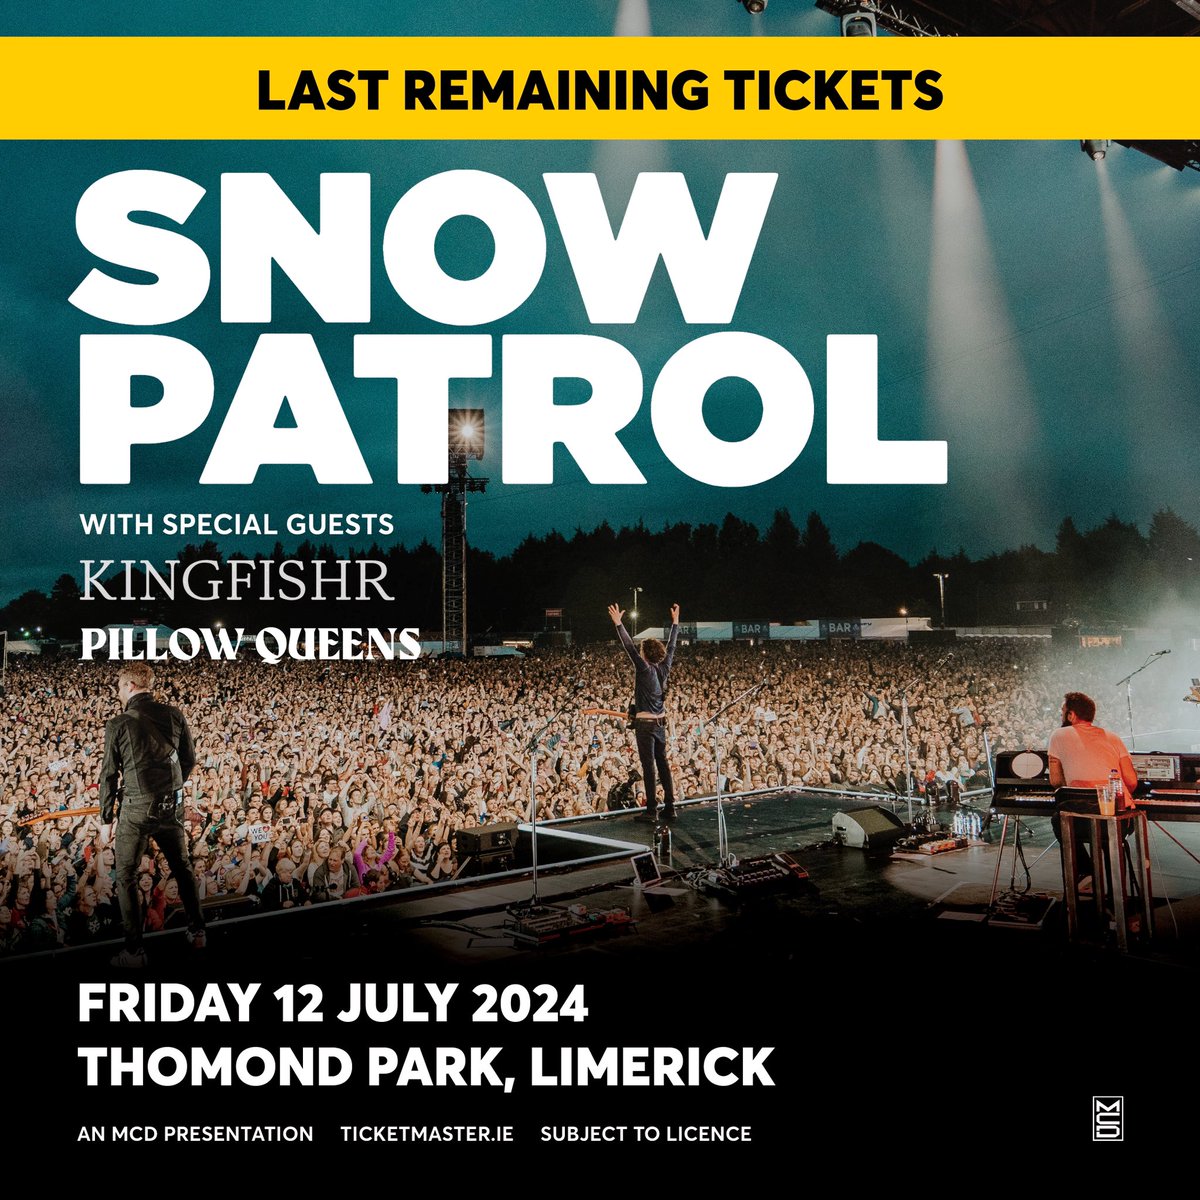 Last remaining tickets available now for our Limerick show with @KingfishrBand & @PillowQueens. We can’t wait. See you there. Tickets: ticketmaster.ie/snow-patrol-li…